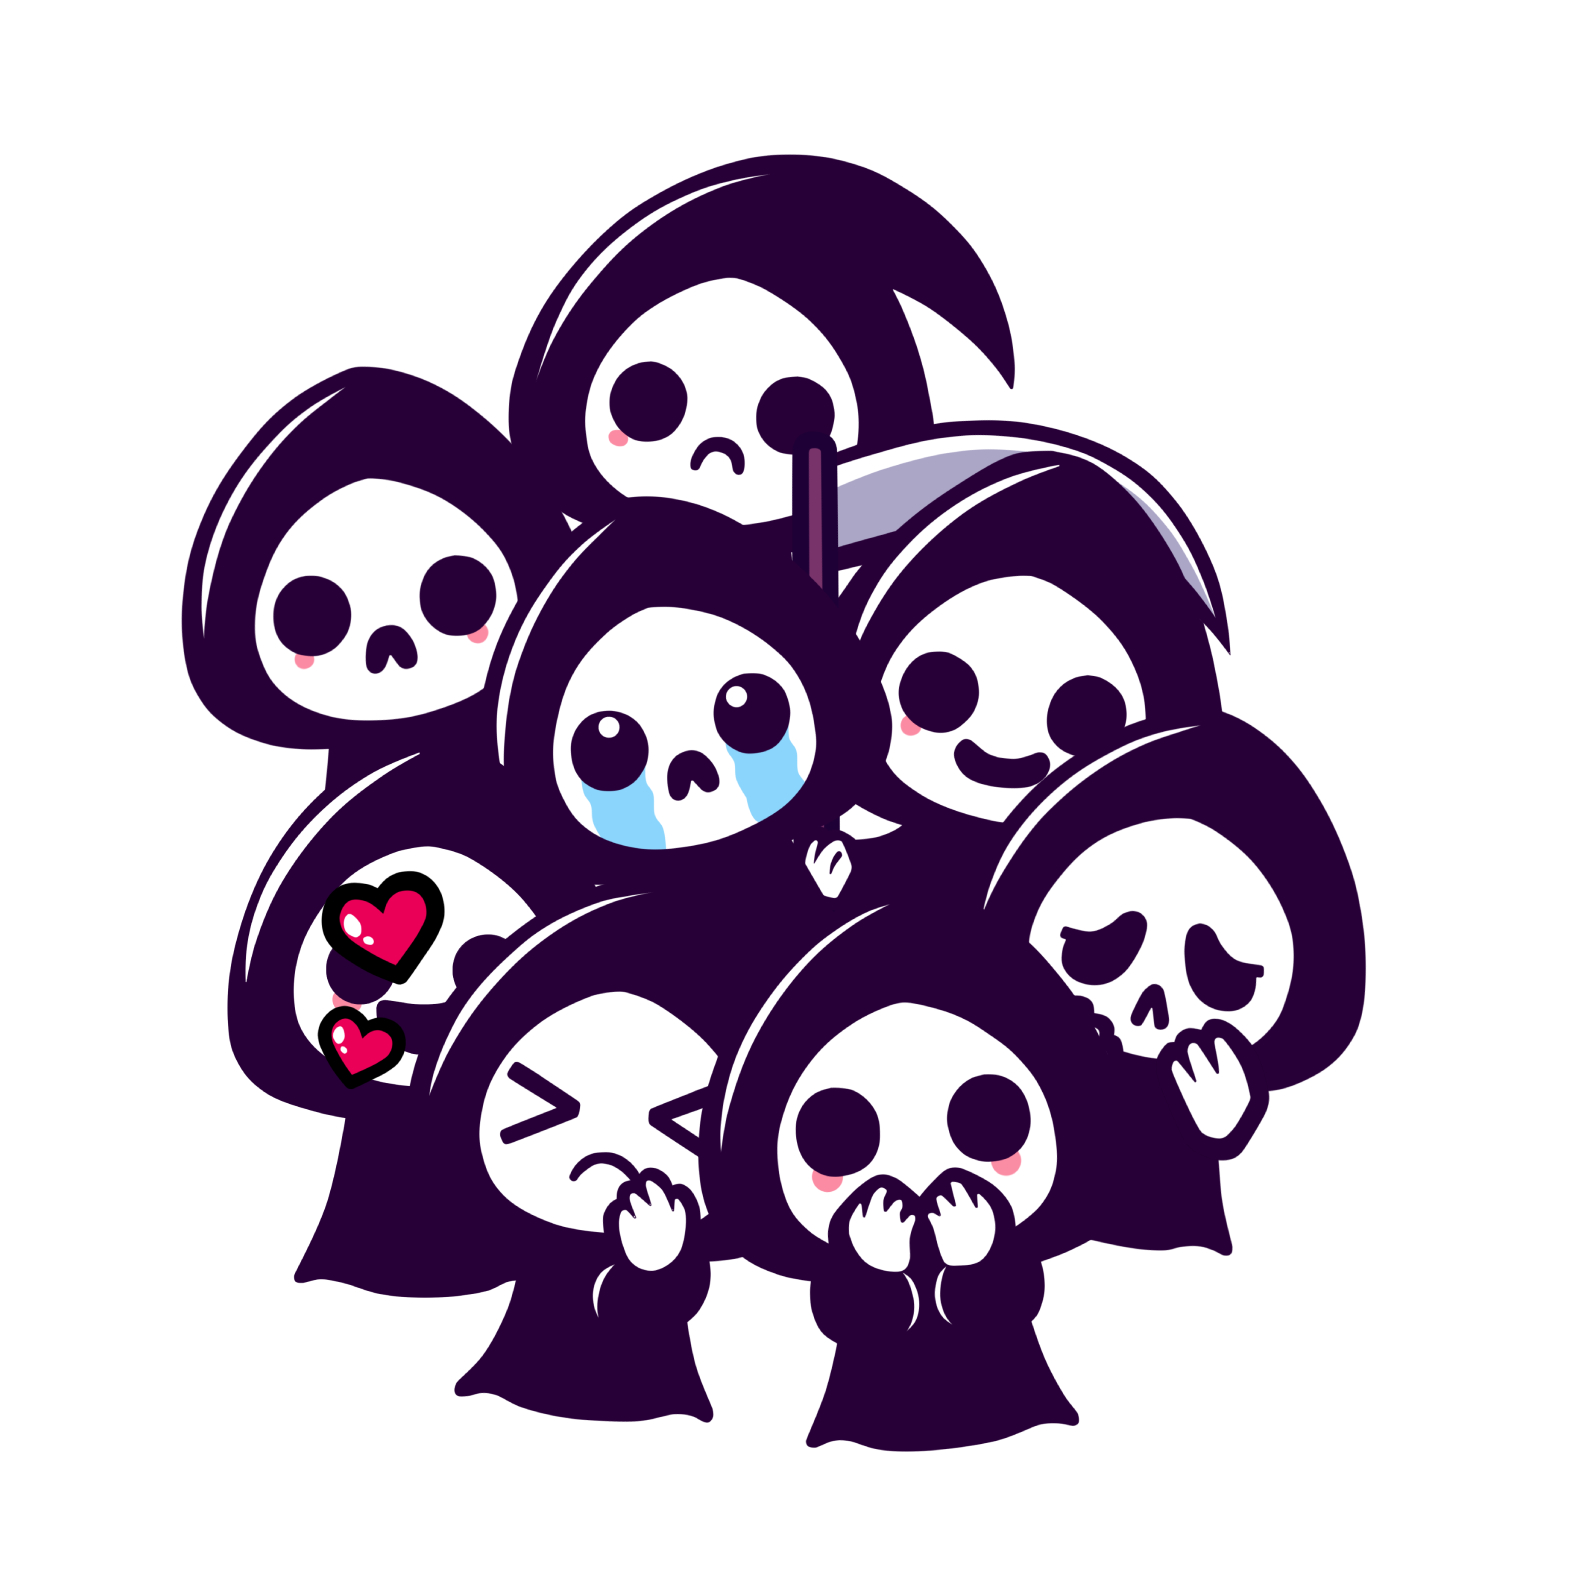 Sticker pack with cute death cover image.